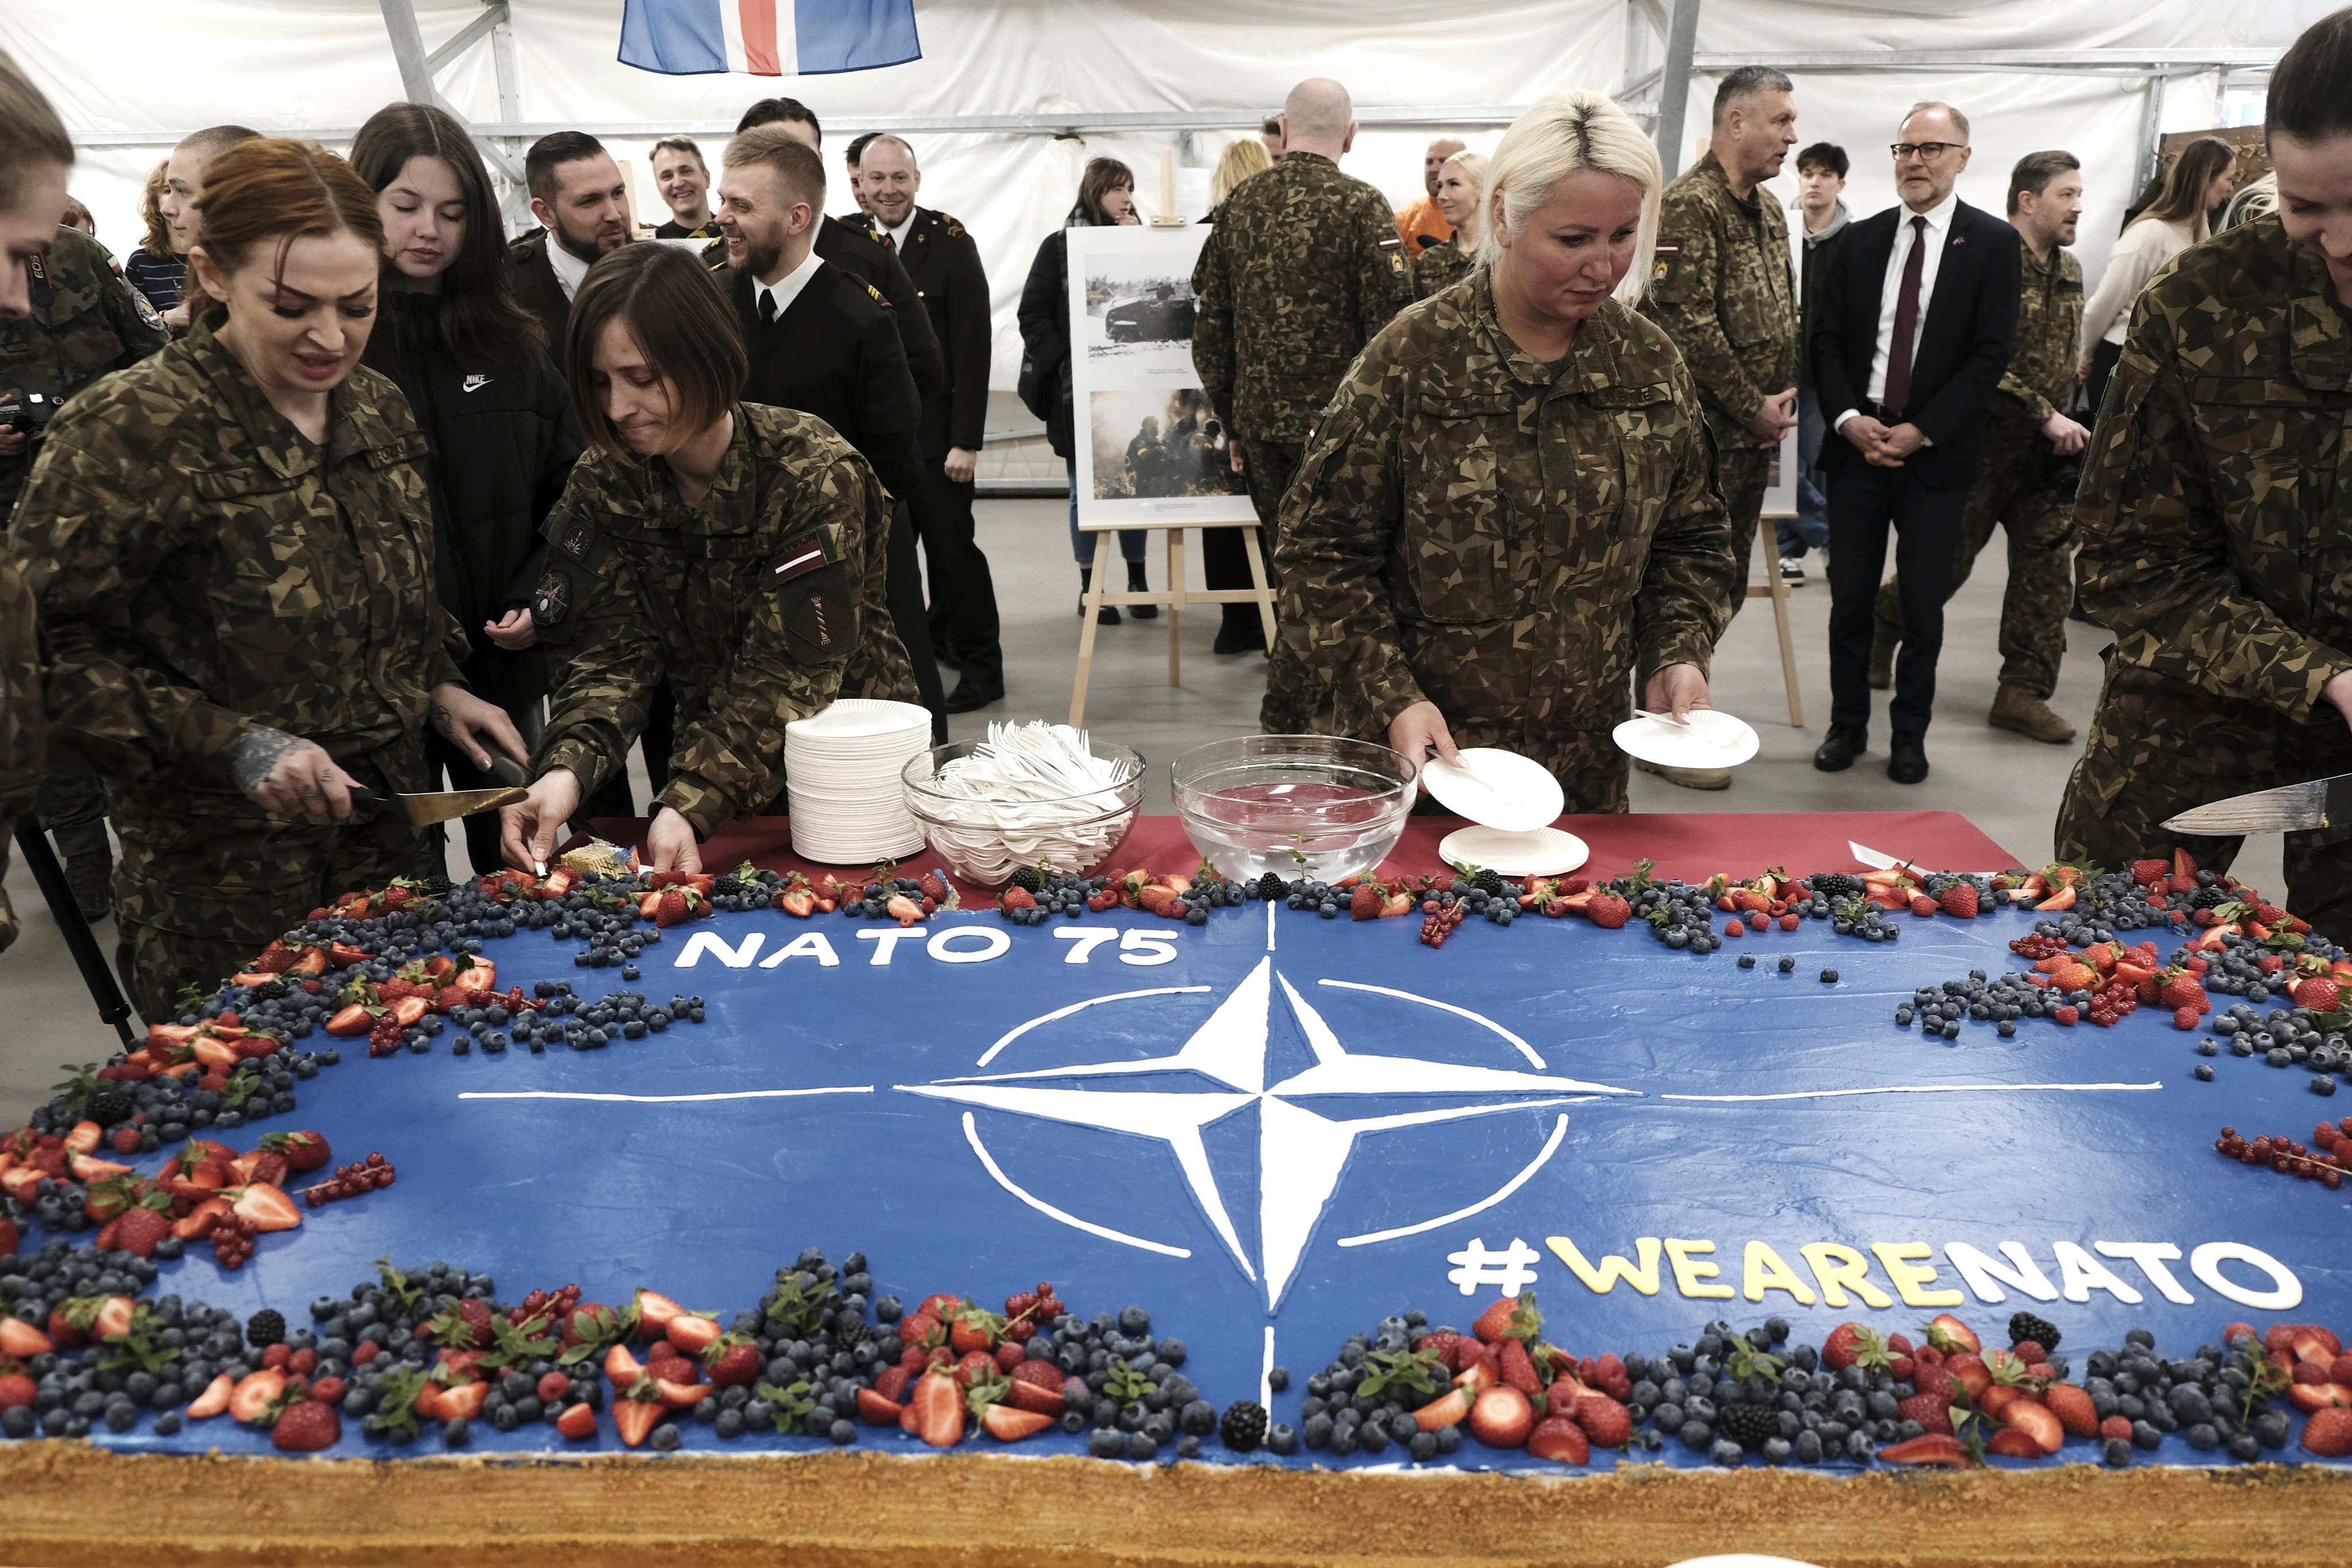 Soldiers prepare slices of a celebration cake during a ceremony marking the 75th anniversary of Nato at the Adazi military base near Riga, Latvia, on April 4. The North Atlantic Treaty Organization now has 32 member states. Photo: EPA-EFE